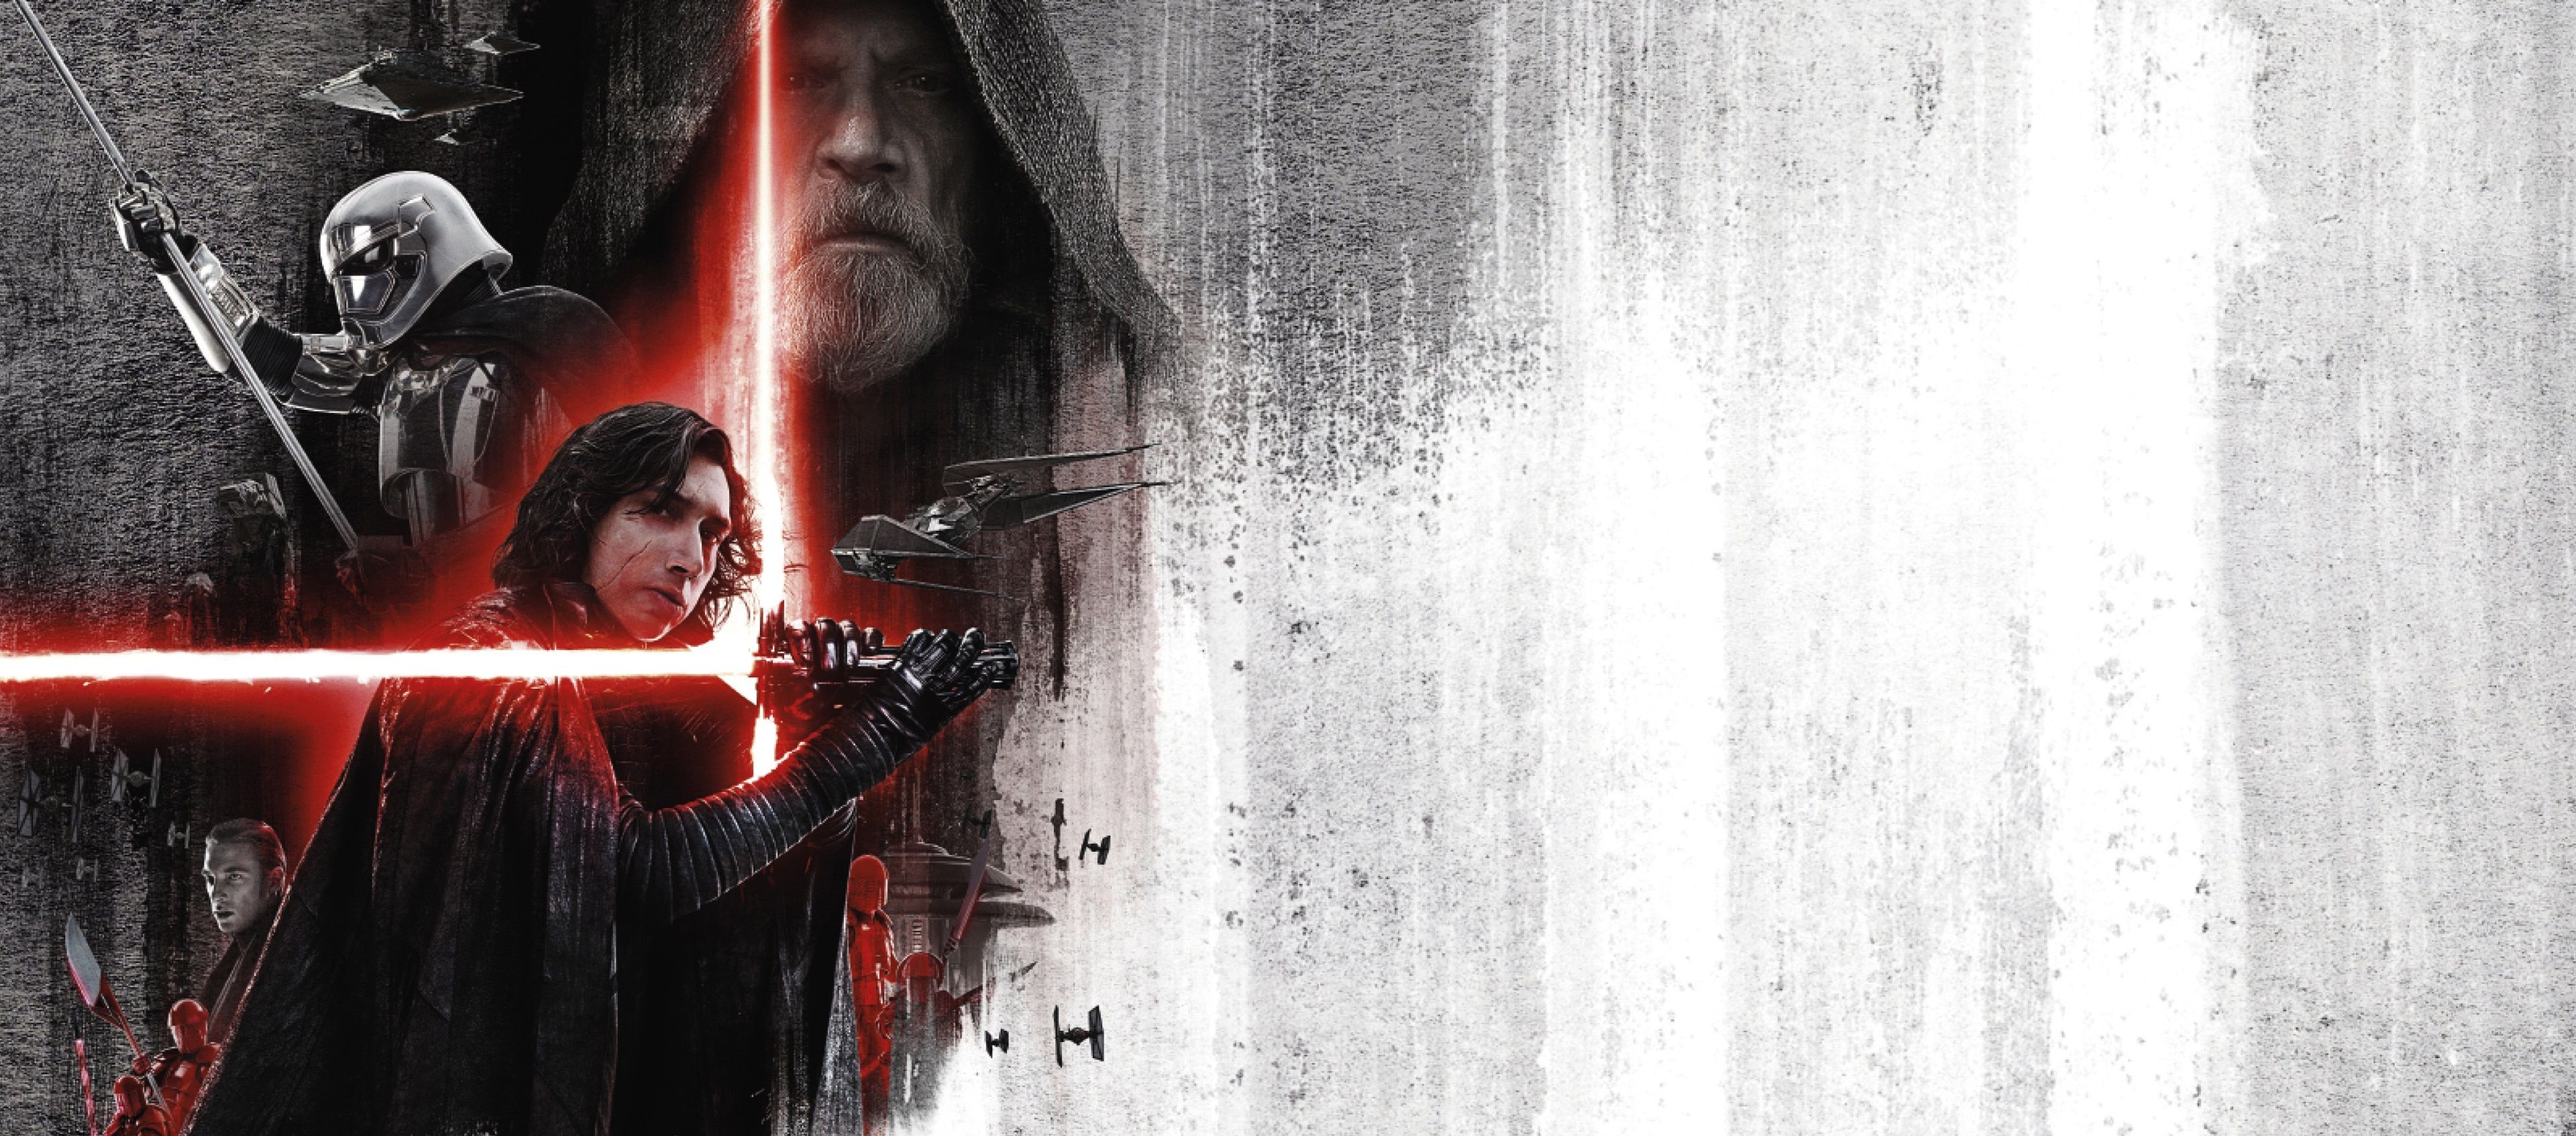 star wars the last jedi 4k picture for desktop. Star wars characters wallpaper, Star wars wallpaper, Star wars quotes